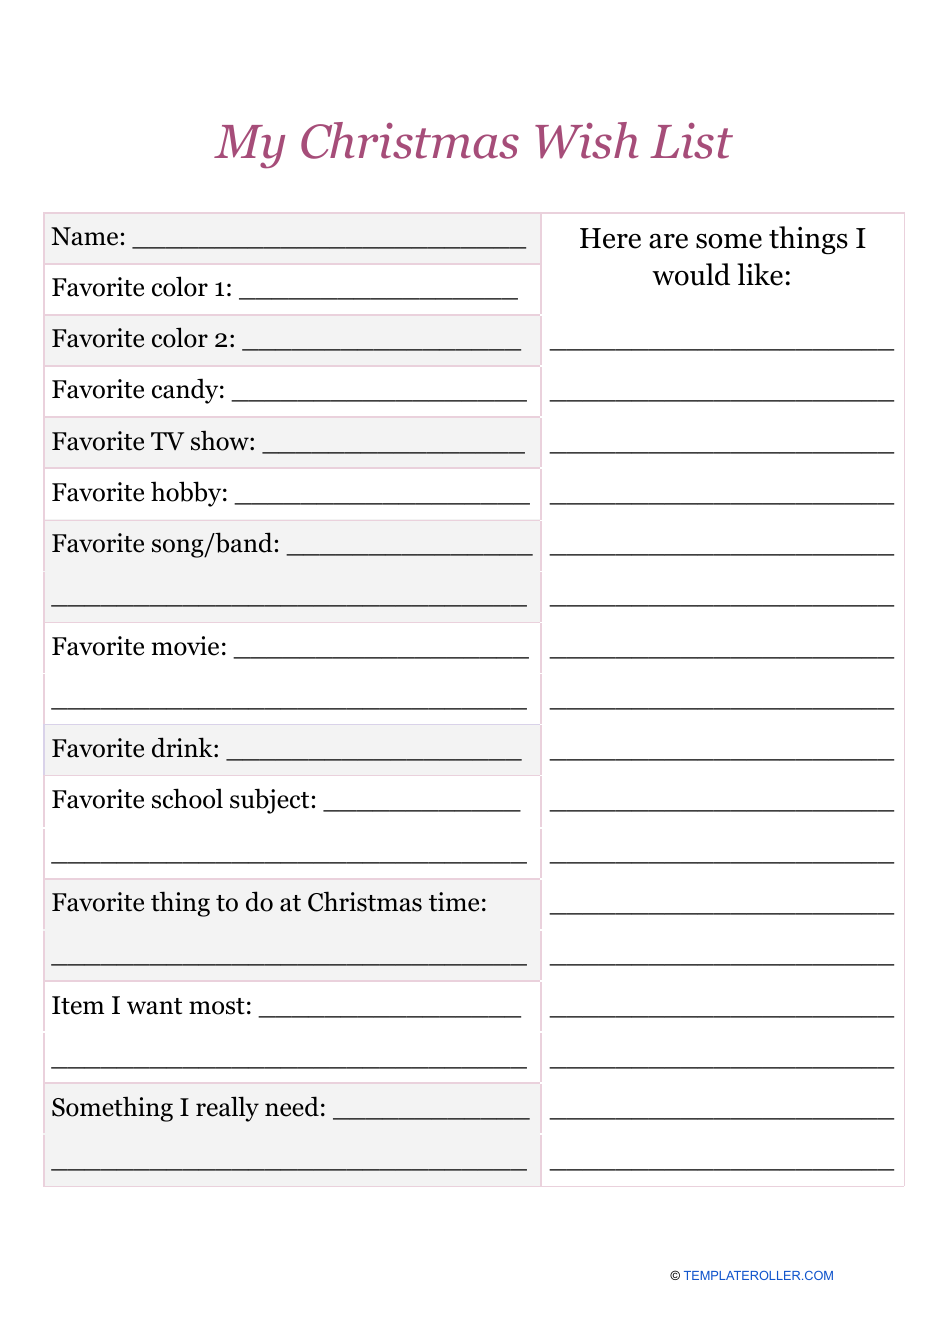 My Christmas Wish List Template - Pink Image Preview